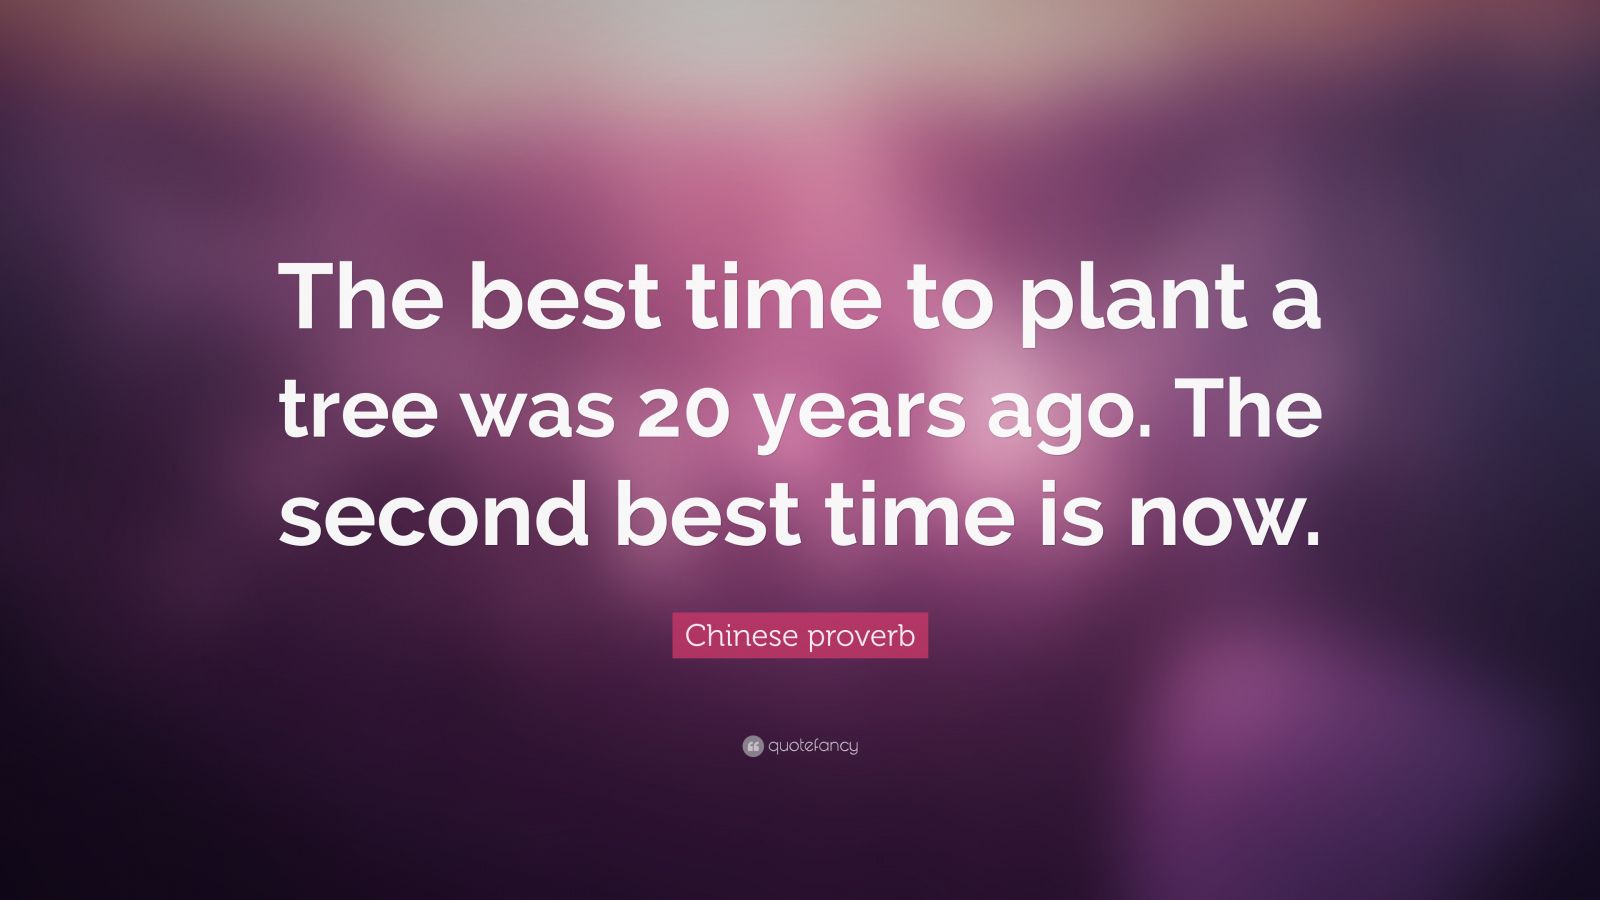 Chinese proverb Quote: “The best time to plant a tree was 20 years ago ...